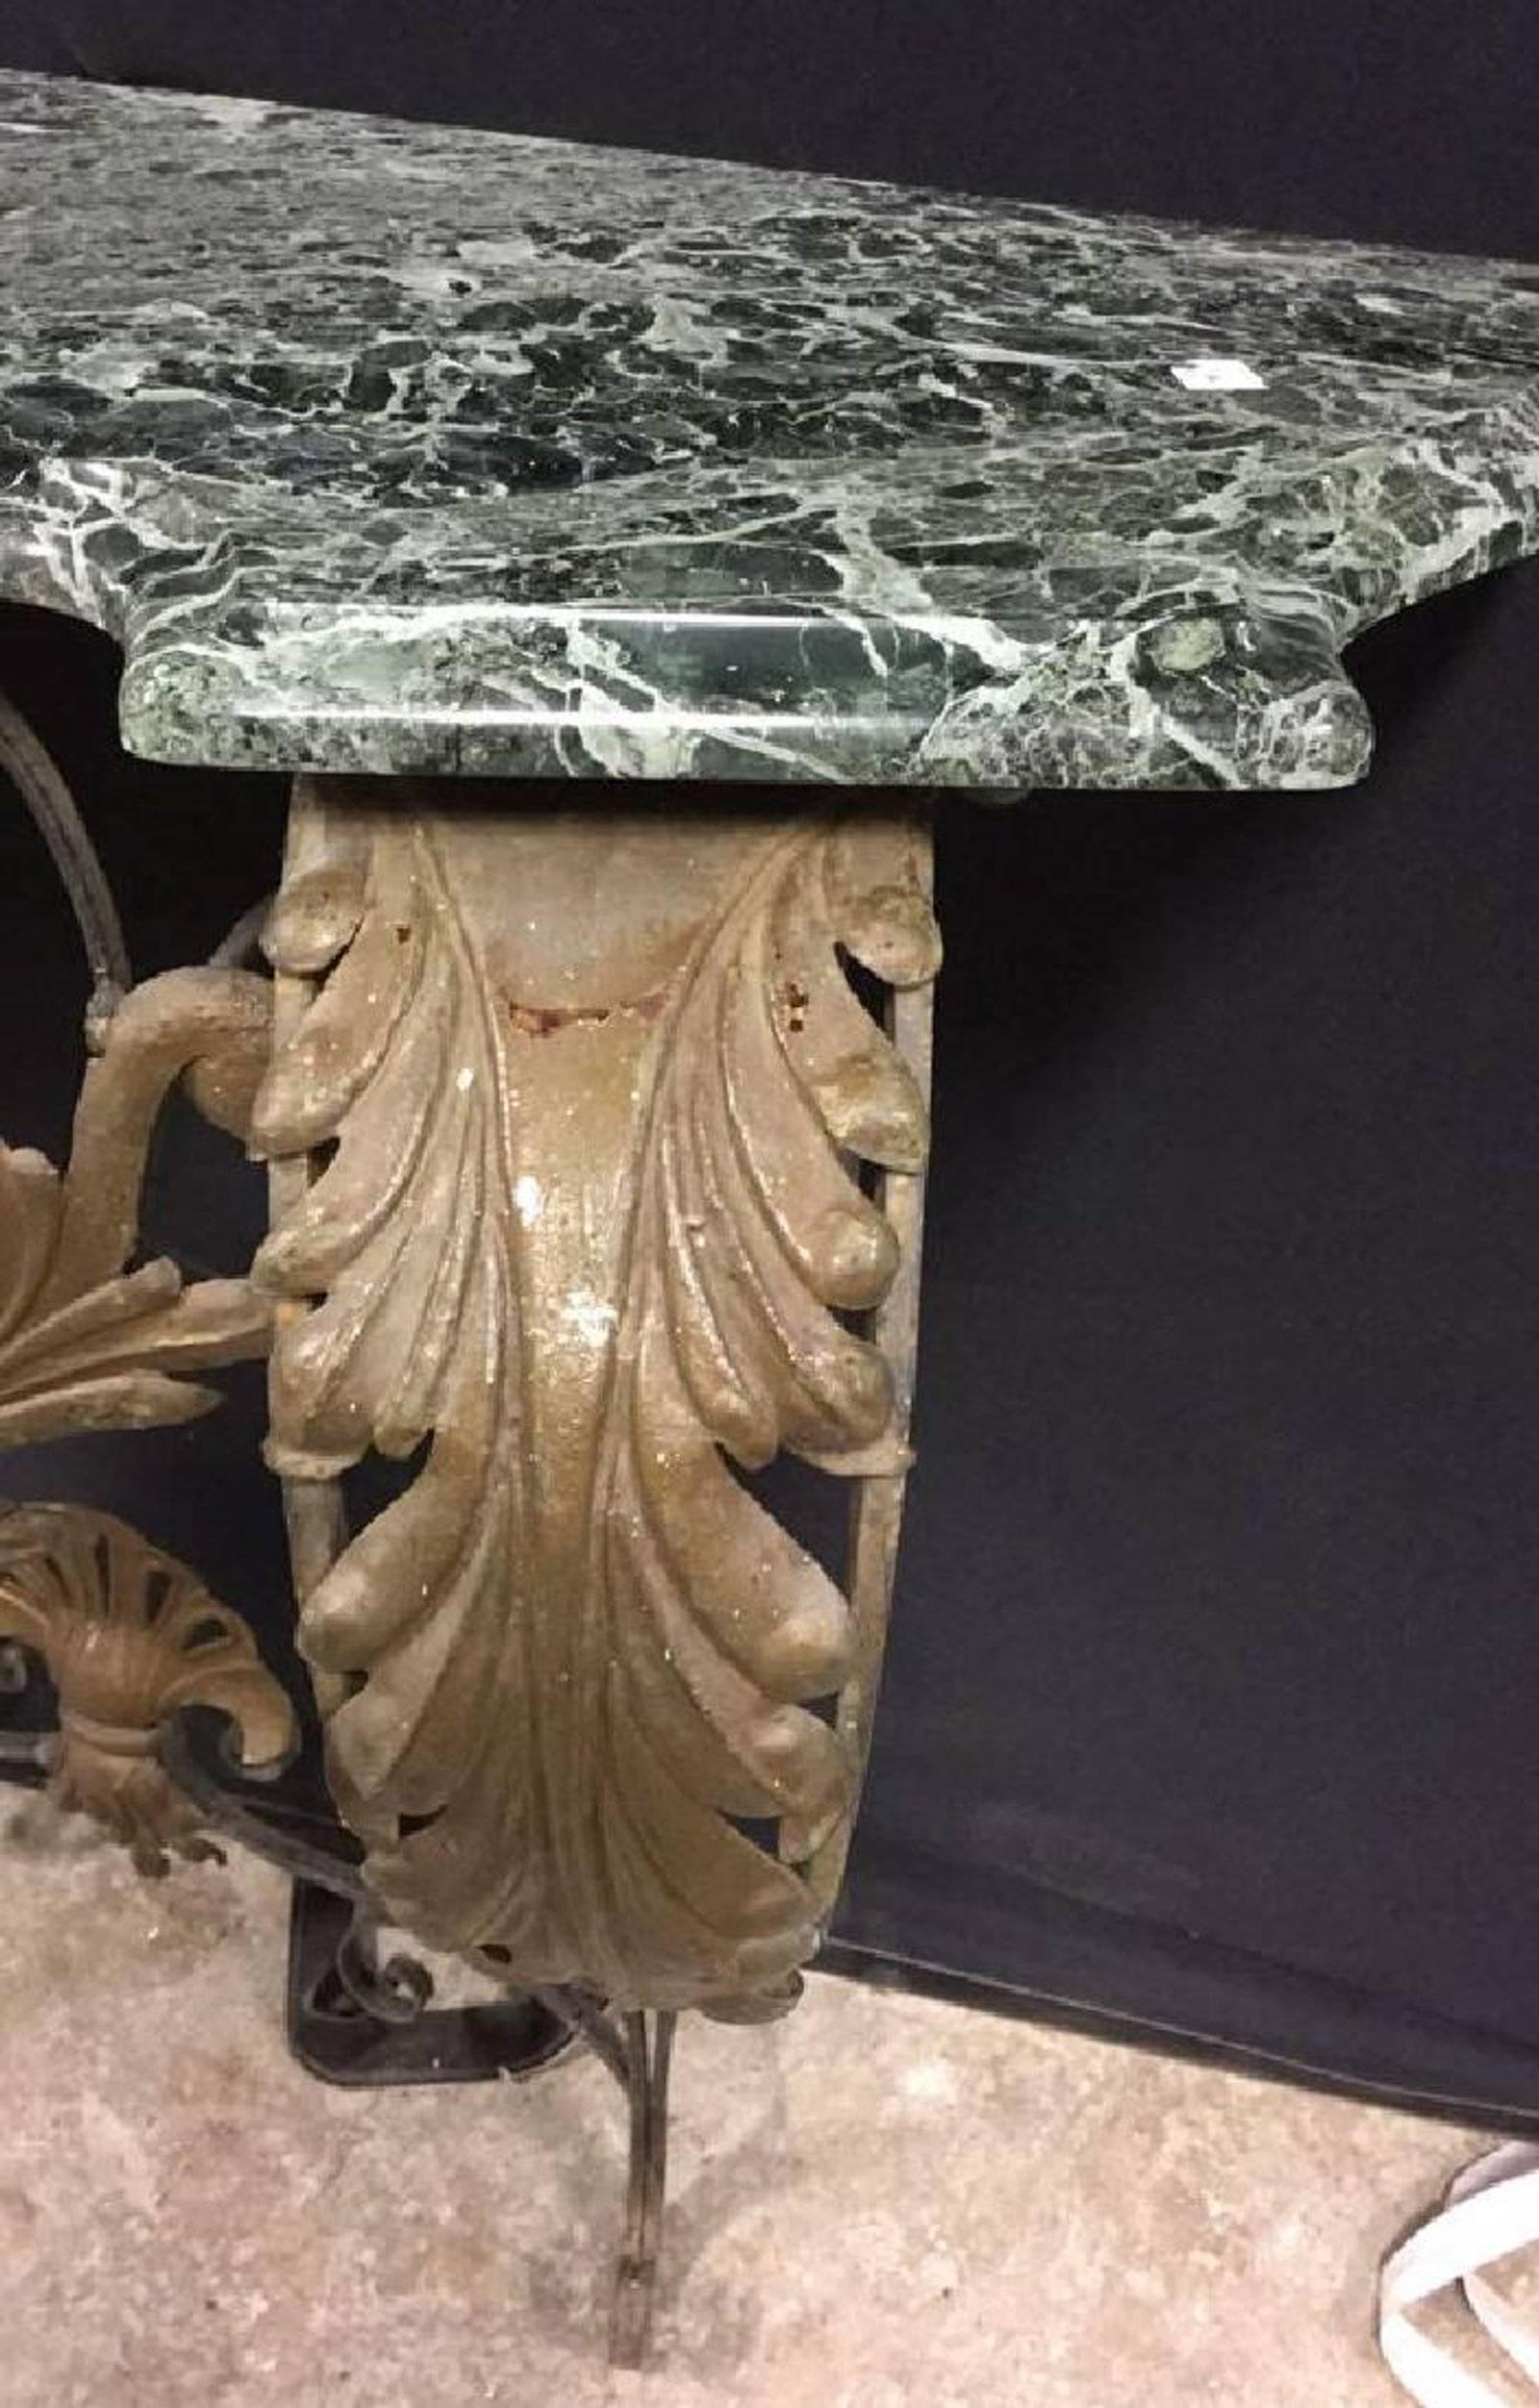 Rococo style console table made with wrought iron, gilt metal leaf decoration and green serpentine marble top on ornate metal base. Entry hallway table.